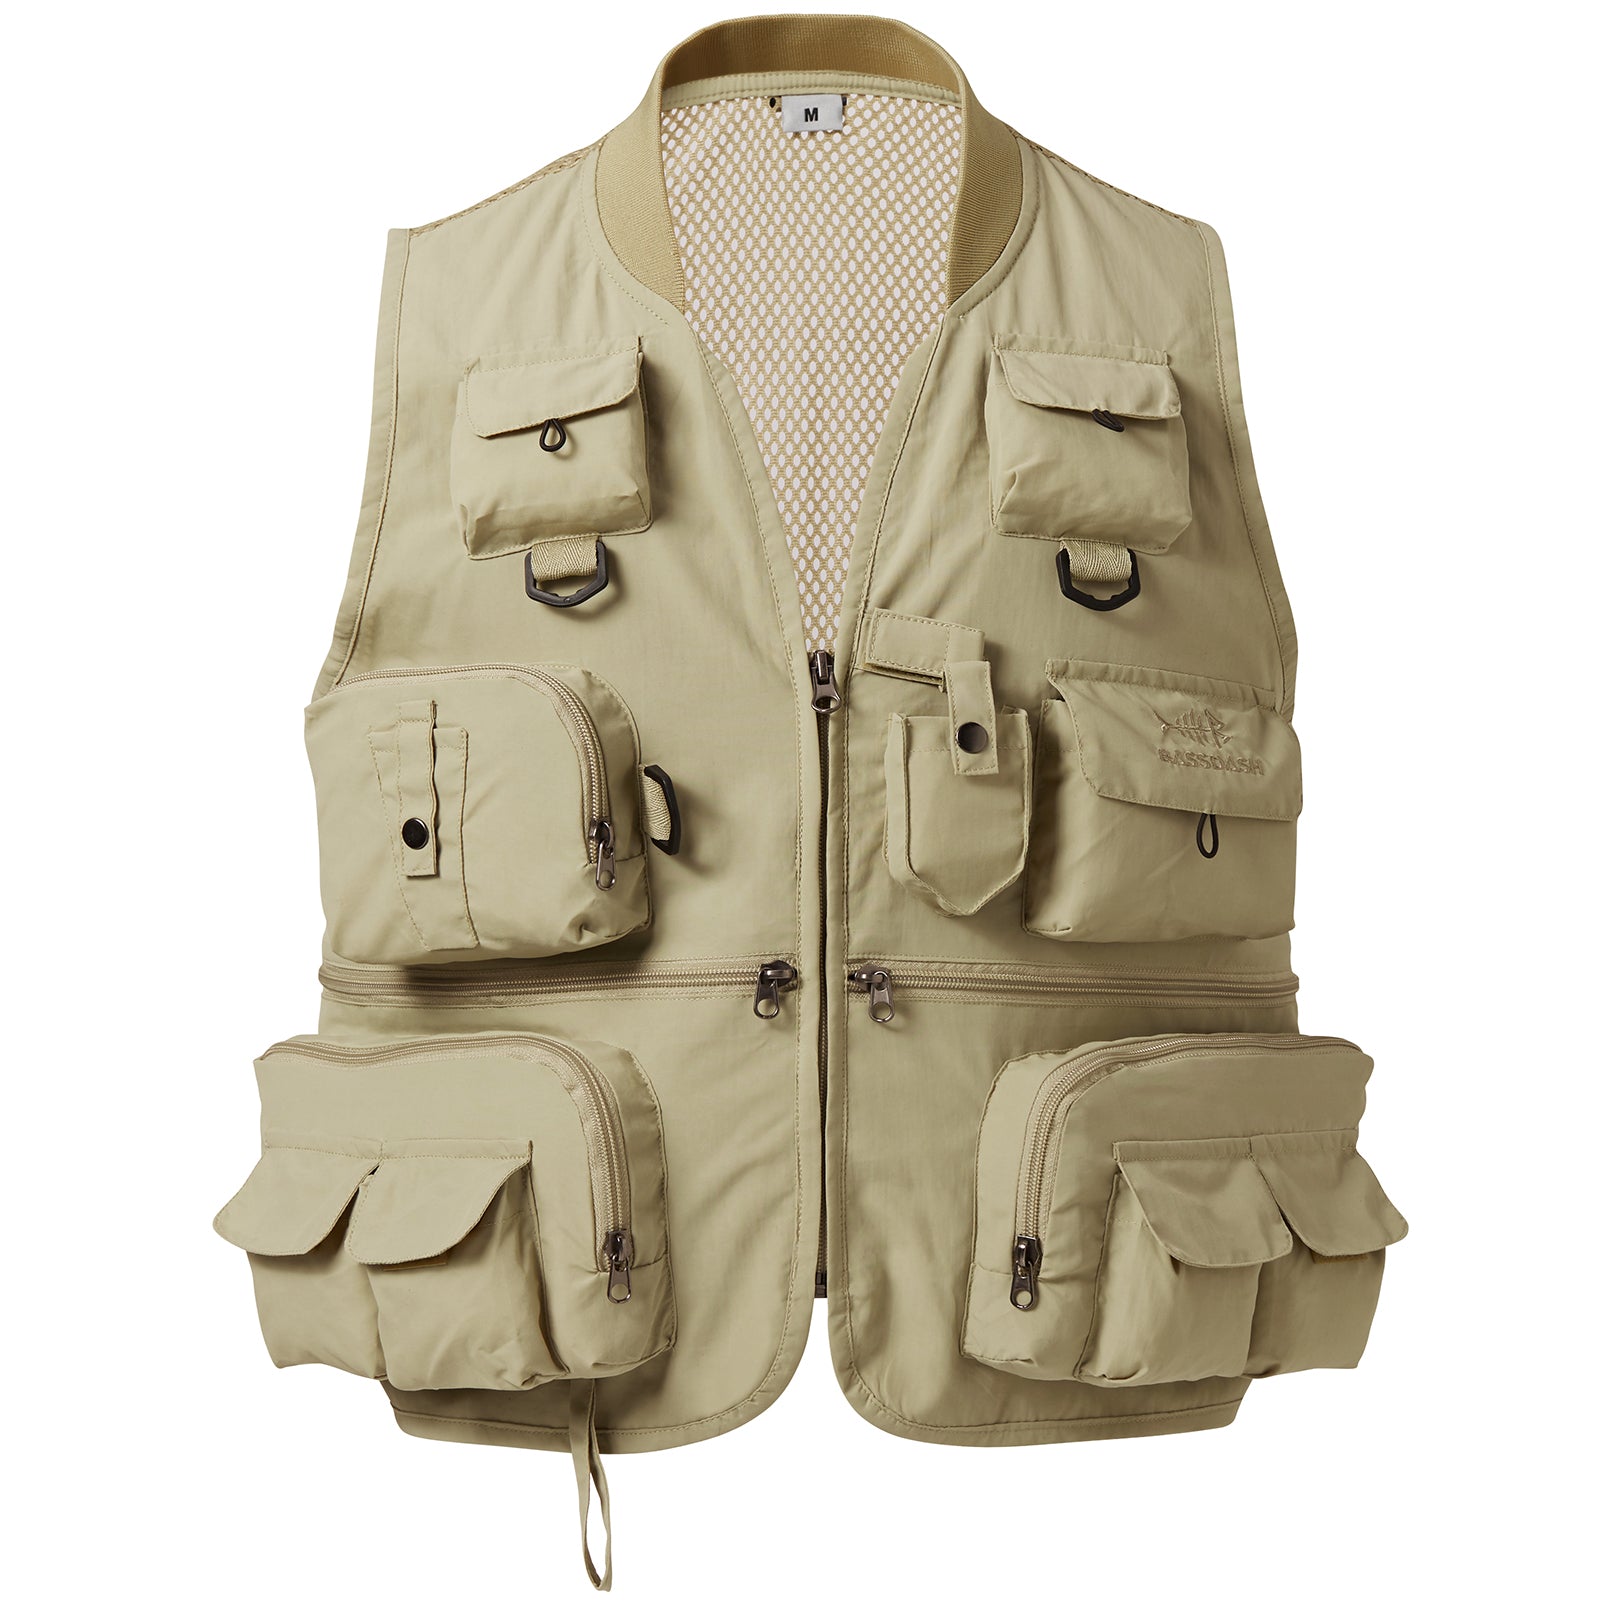 VTG Angler's Expressions size 4 Youth Fly Fishing vest Tan w